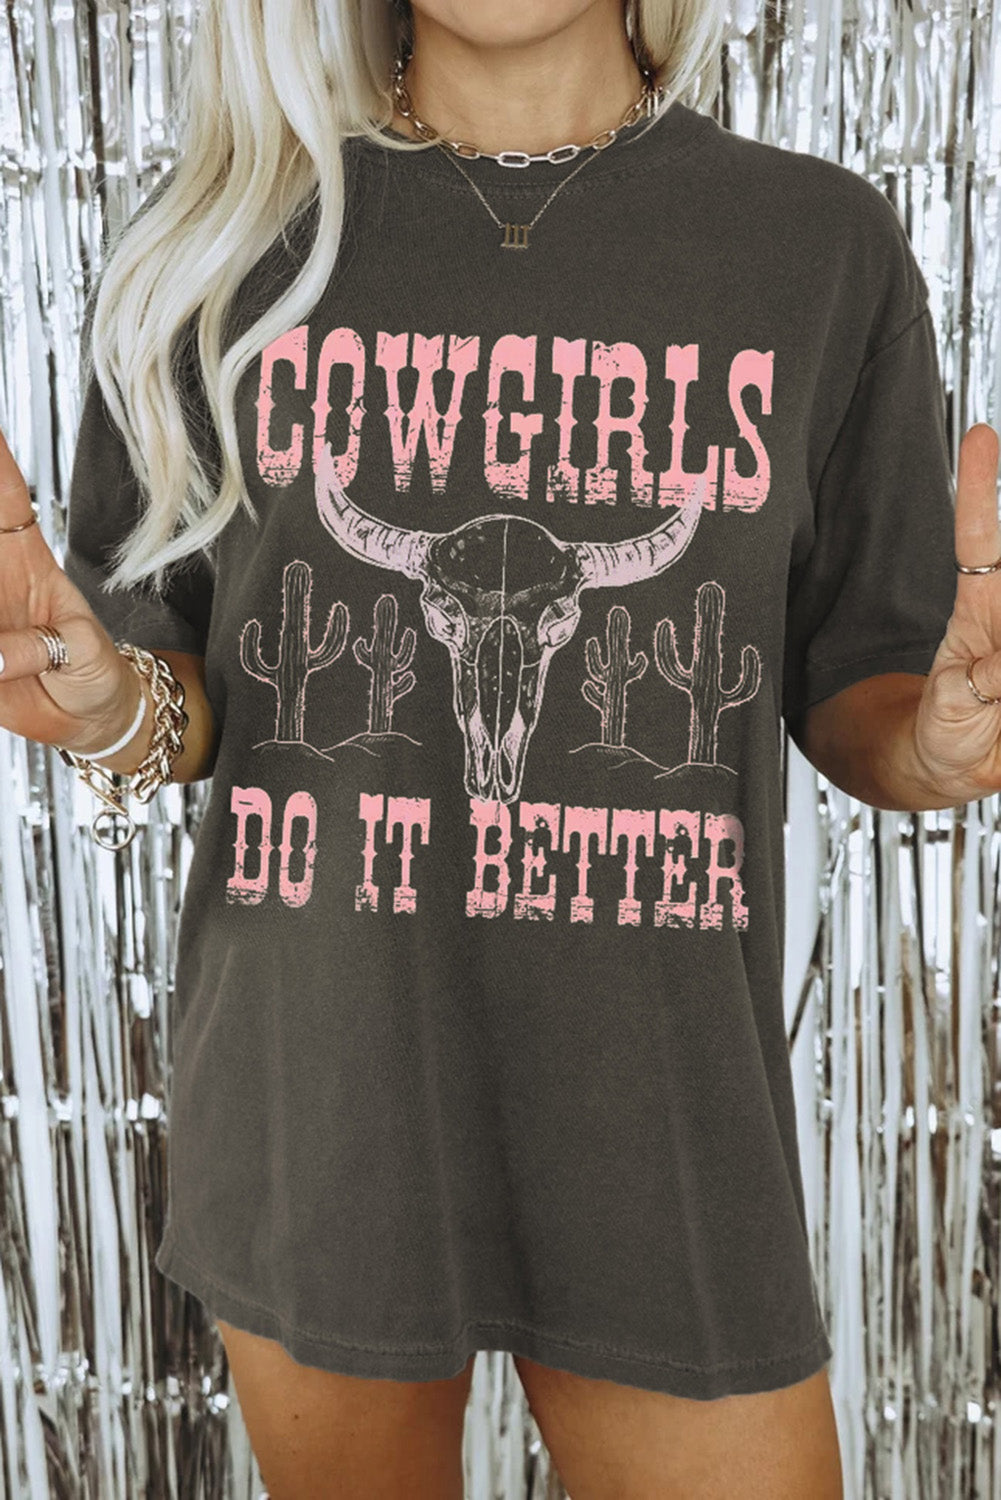 Gray COWGIRLS DO IT BETTER Graphic Print Oversized T Shirt Tops & Tees JT's Designer Fashion